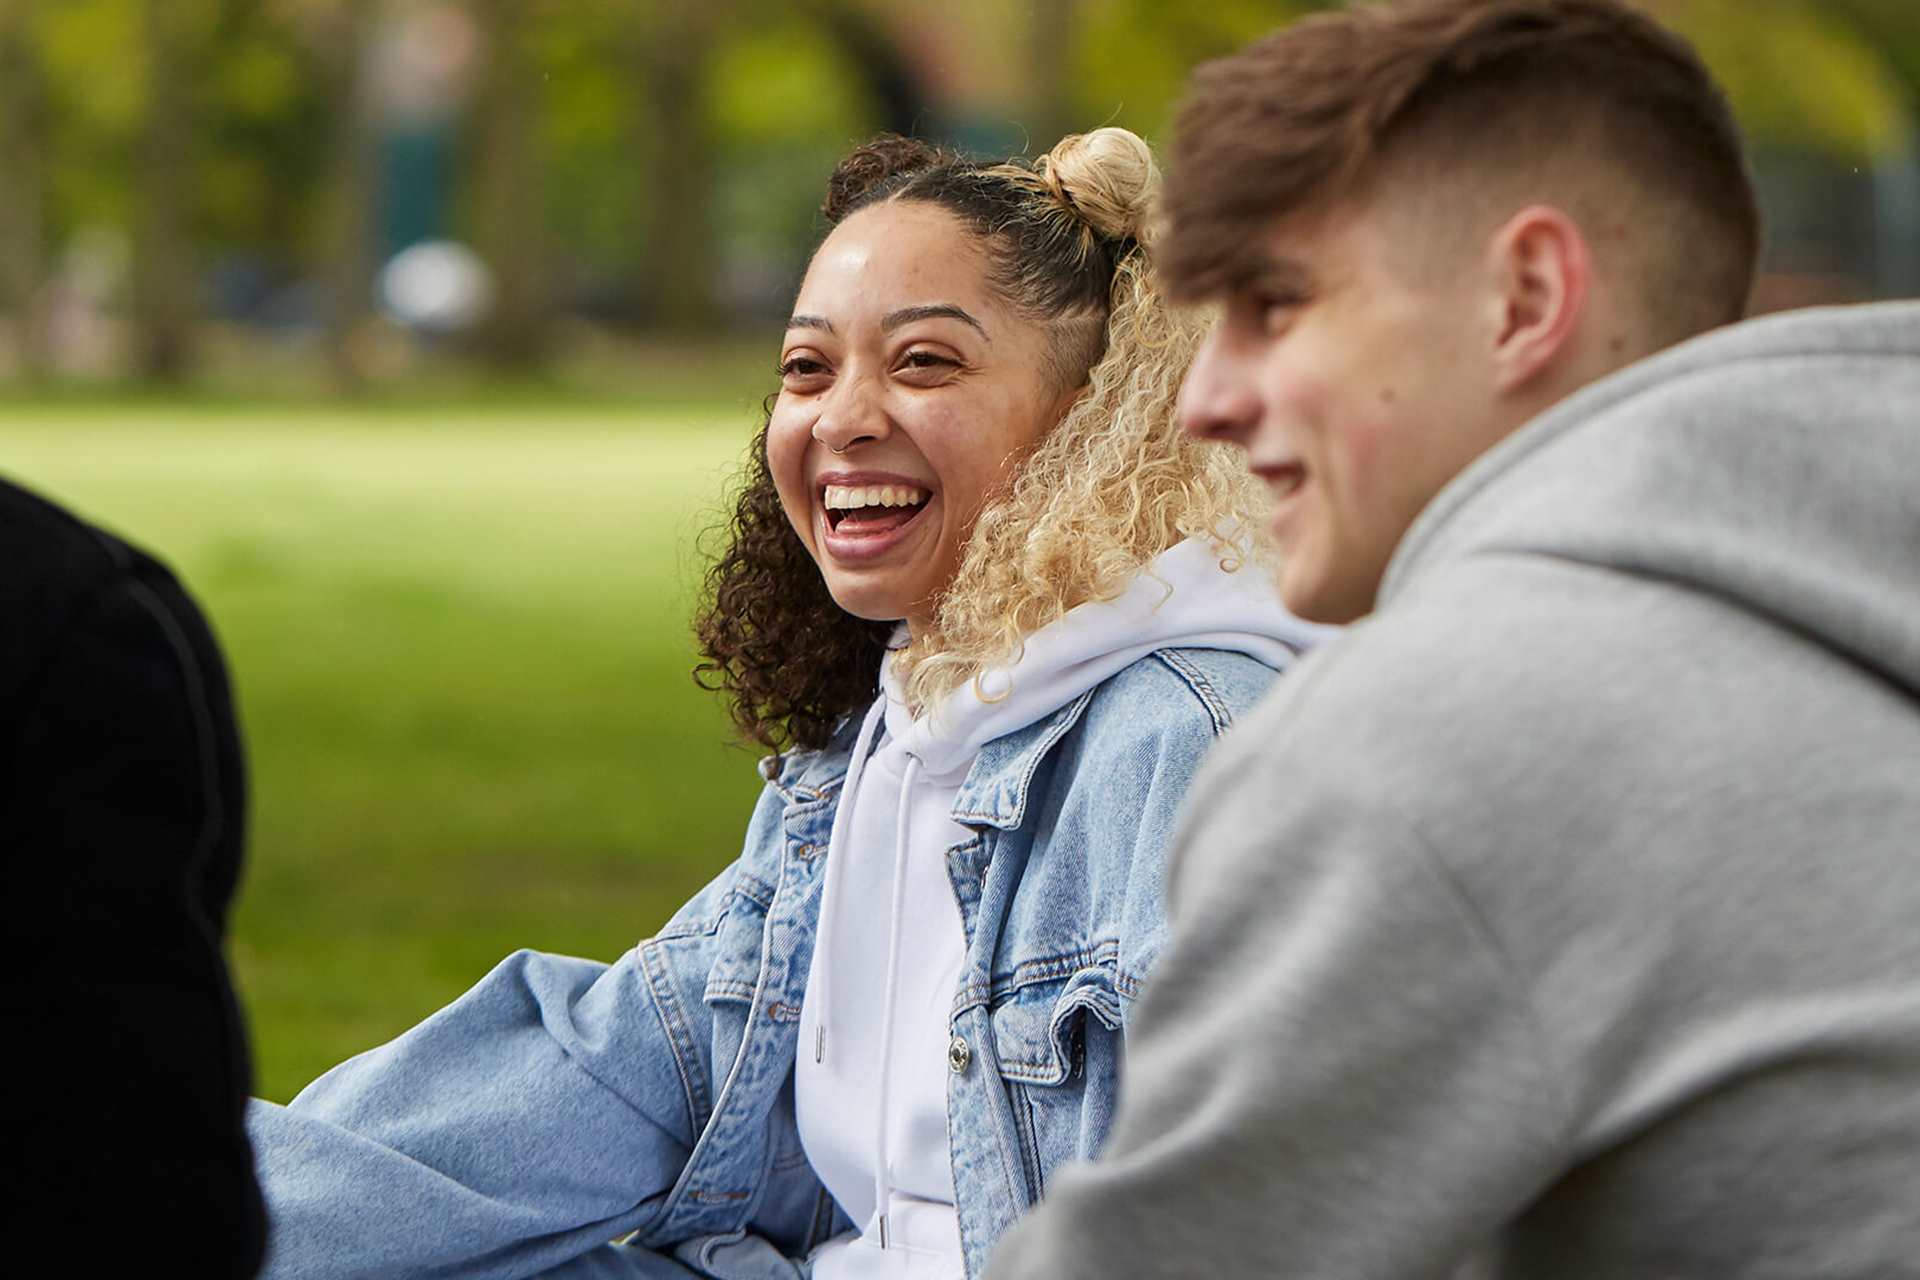 medium-shot-of-three-young-people-a-young-woman-with-curly-hair-in-denim-jacket-is-laughing-while-looking-at-the-two-young-man-in-grey-hoodie-and-black-jacket-looking-and-laughing-at-each-other-while-sitting-in-a-park